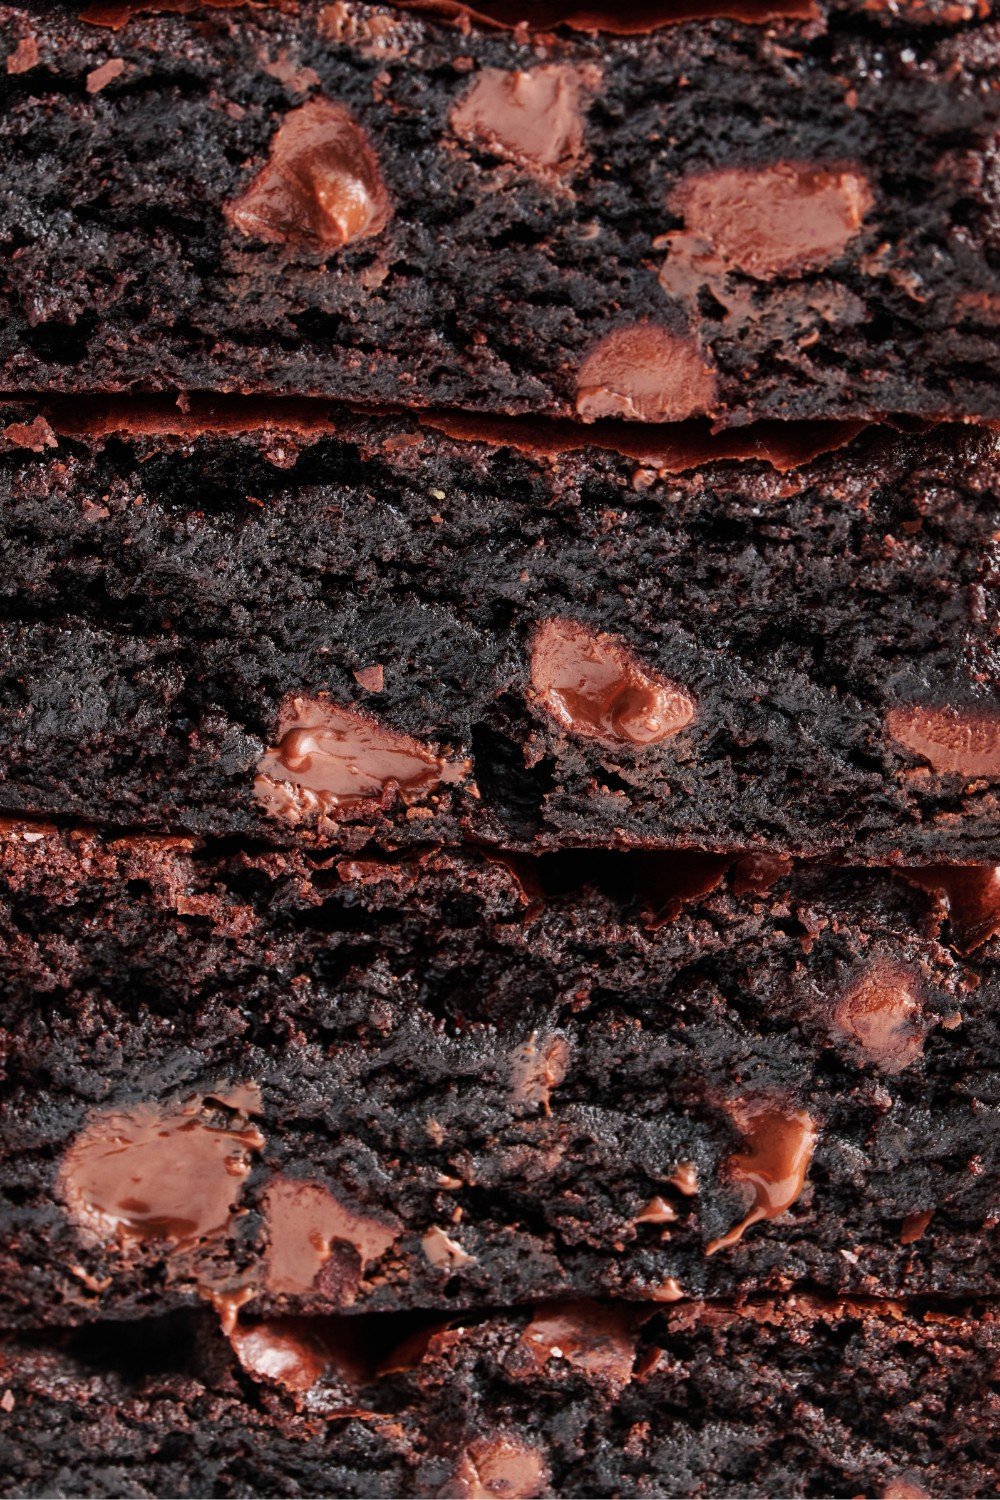 closeup of a stack of brownie slices, showing their dark chocolate color, chocolate chips, and fudgy chewy texture.